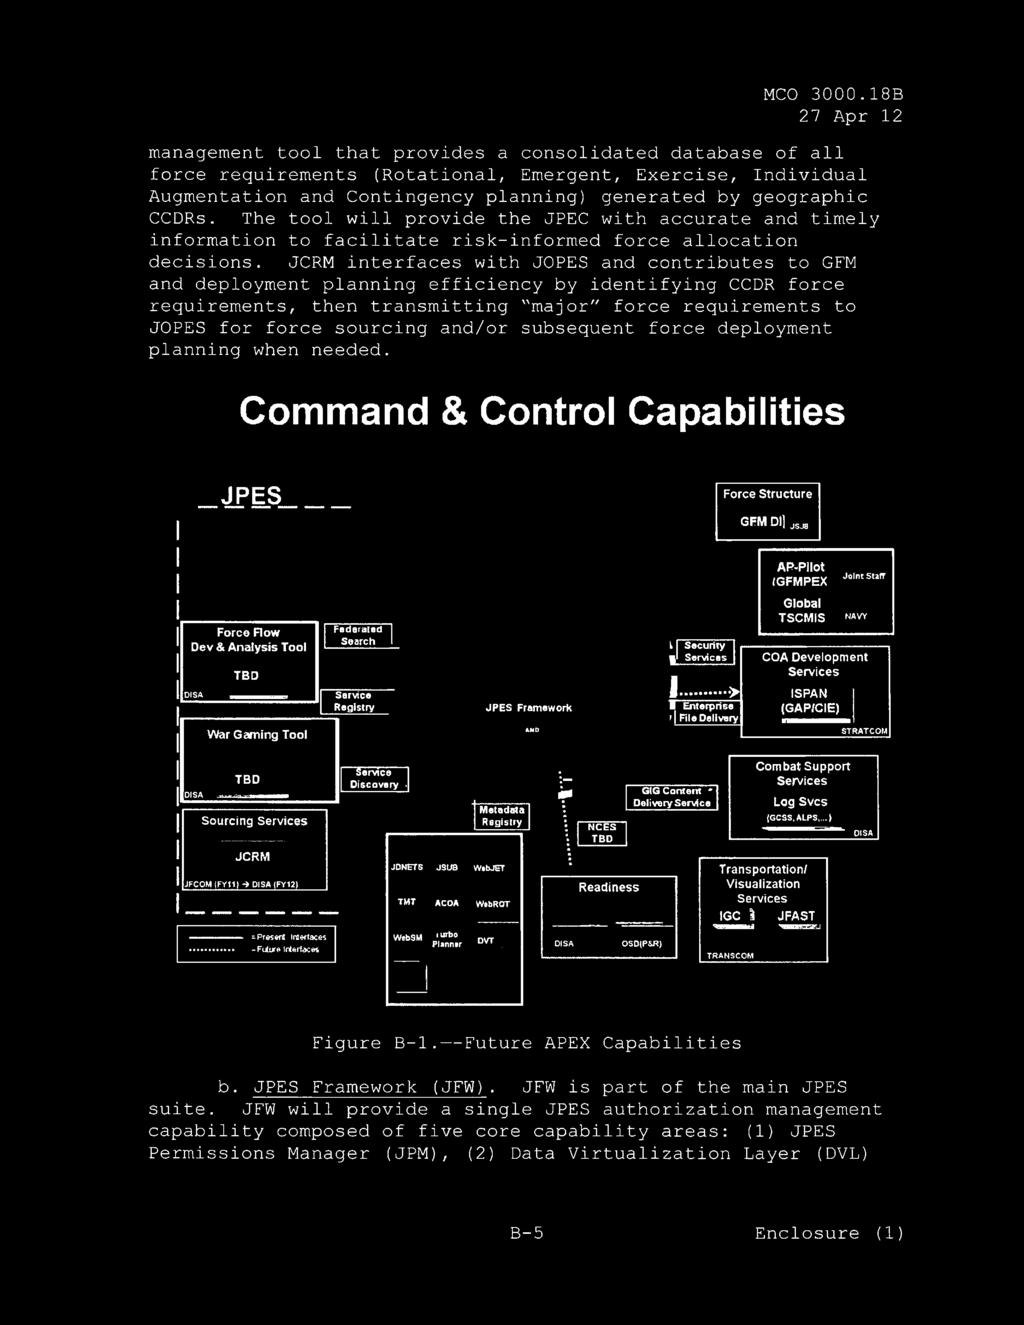 Command & Control Capabilities JPES Force Structure GFMDIj JSJ3 AP-Pilot fgfmpex Joint Staff Force Flow Dev & Analysis Tool DISA TBD War Gaming Tool Federated Search Service Registry JPES Framework